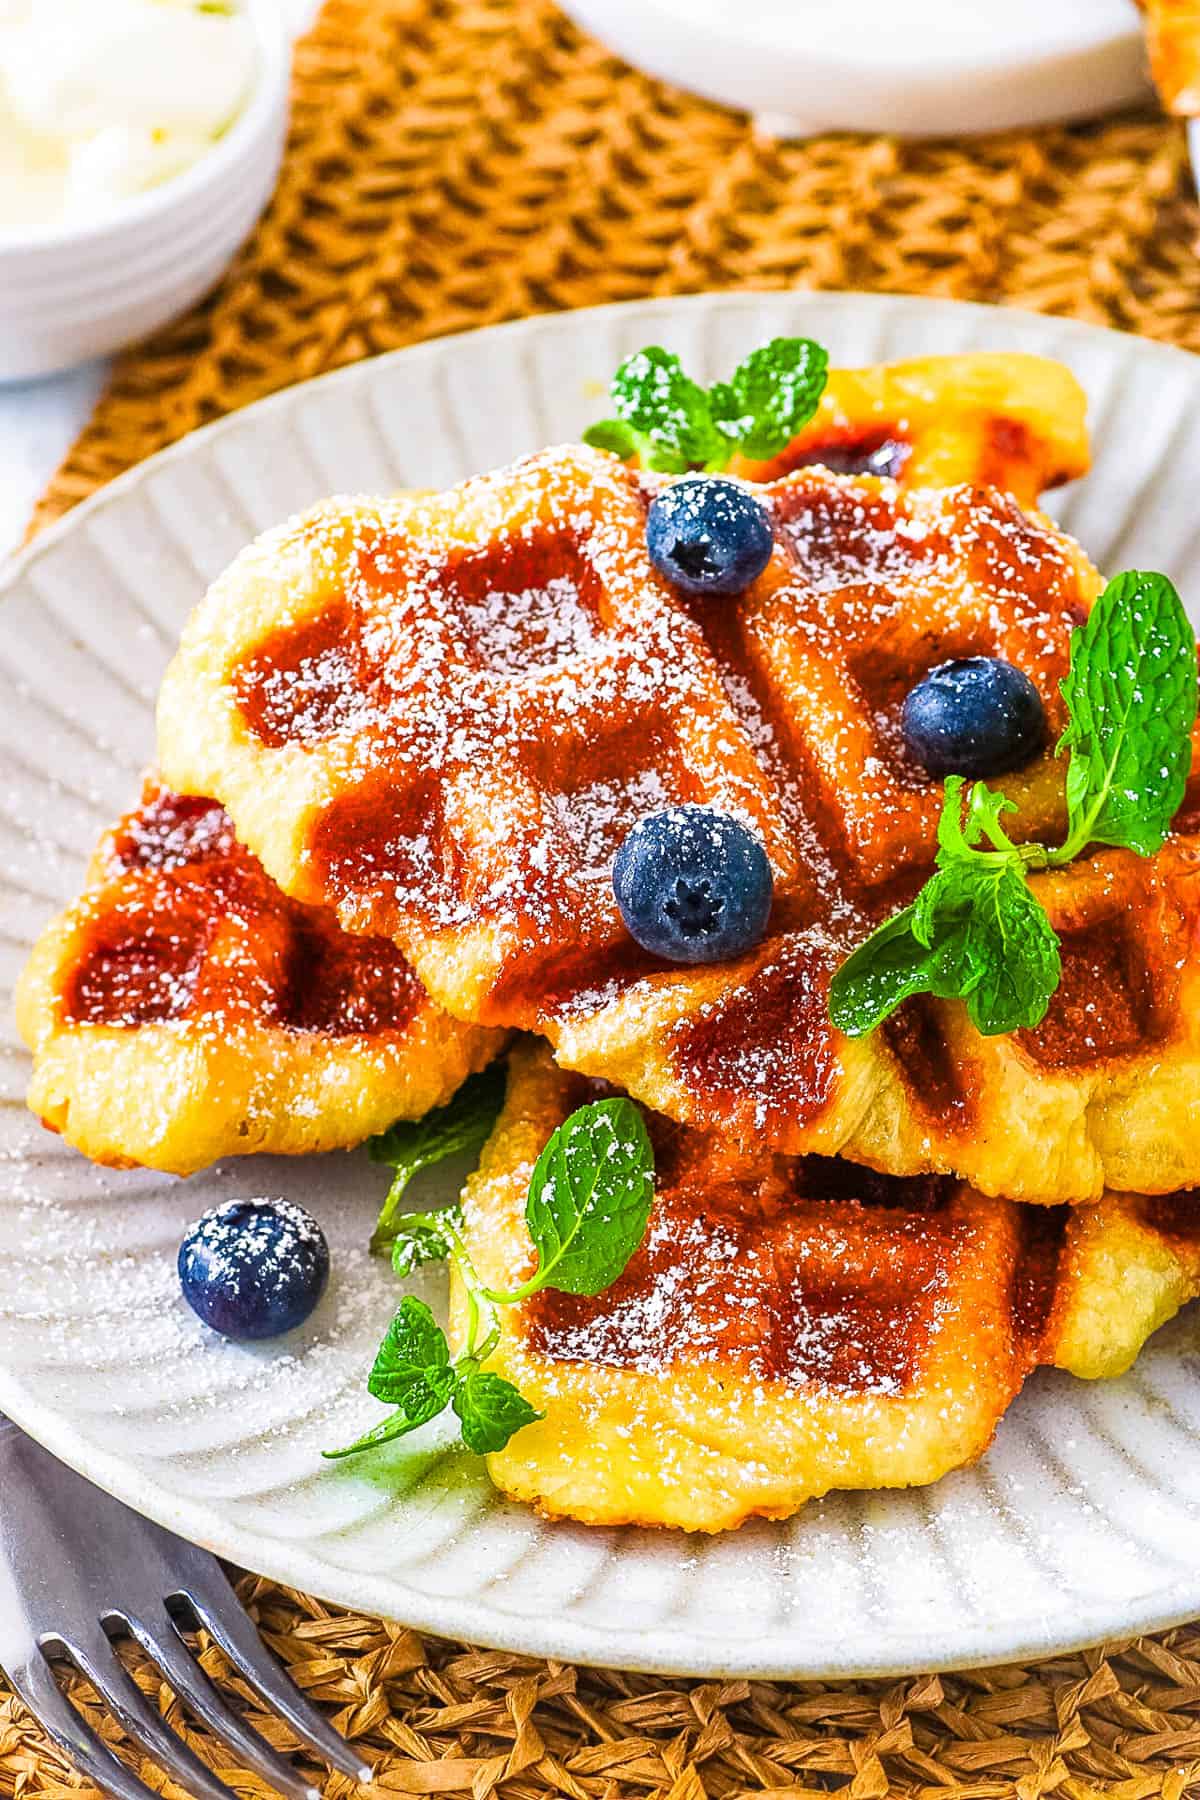 Easy croffle recipe stacked on a white plate, topped with powdered sugar, garnished with blueberries and mint.